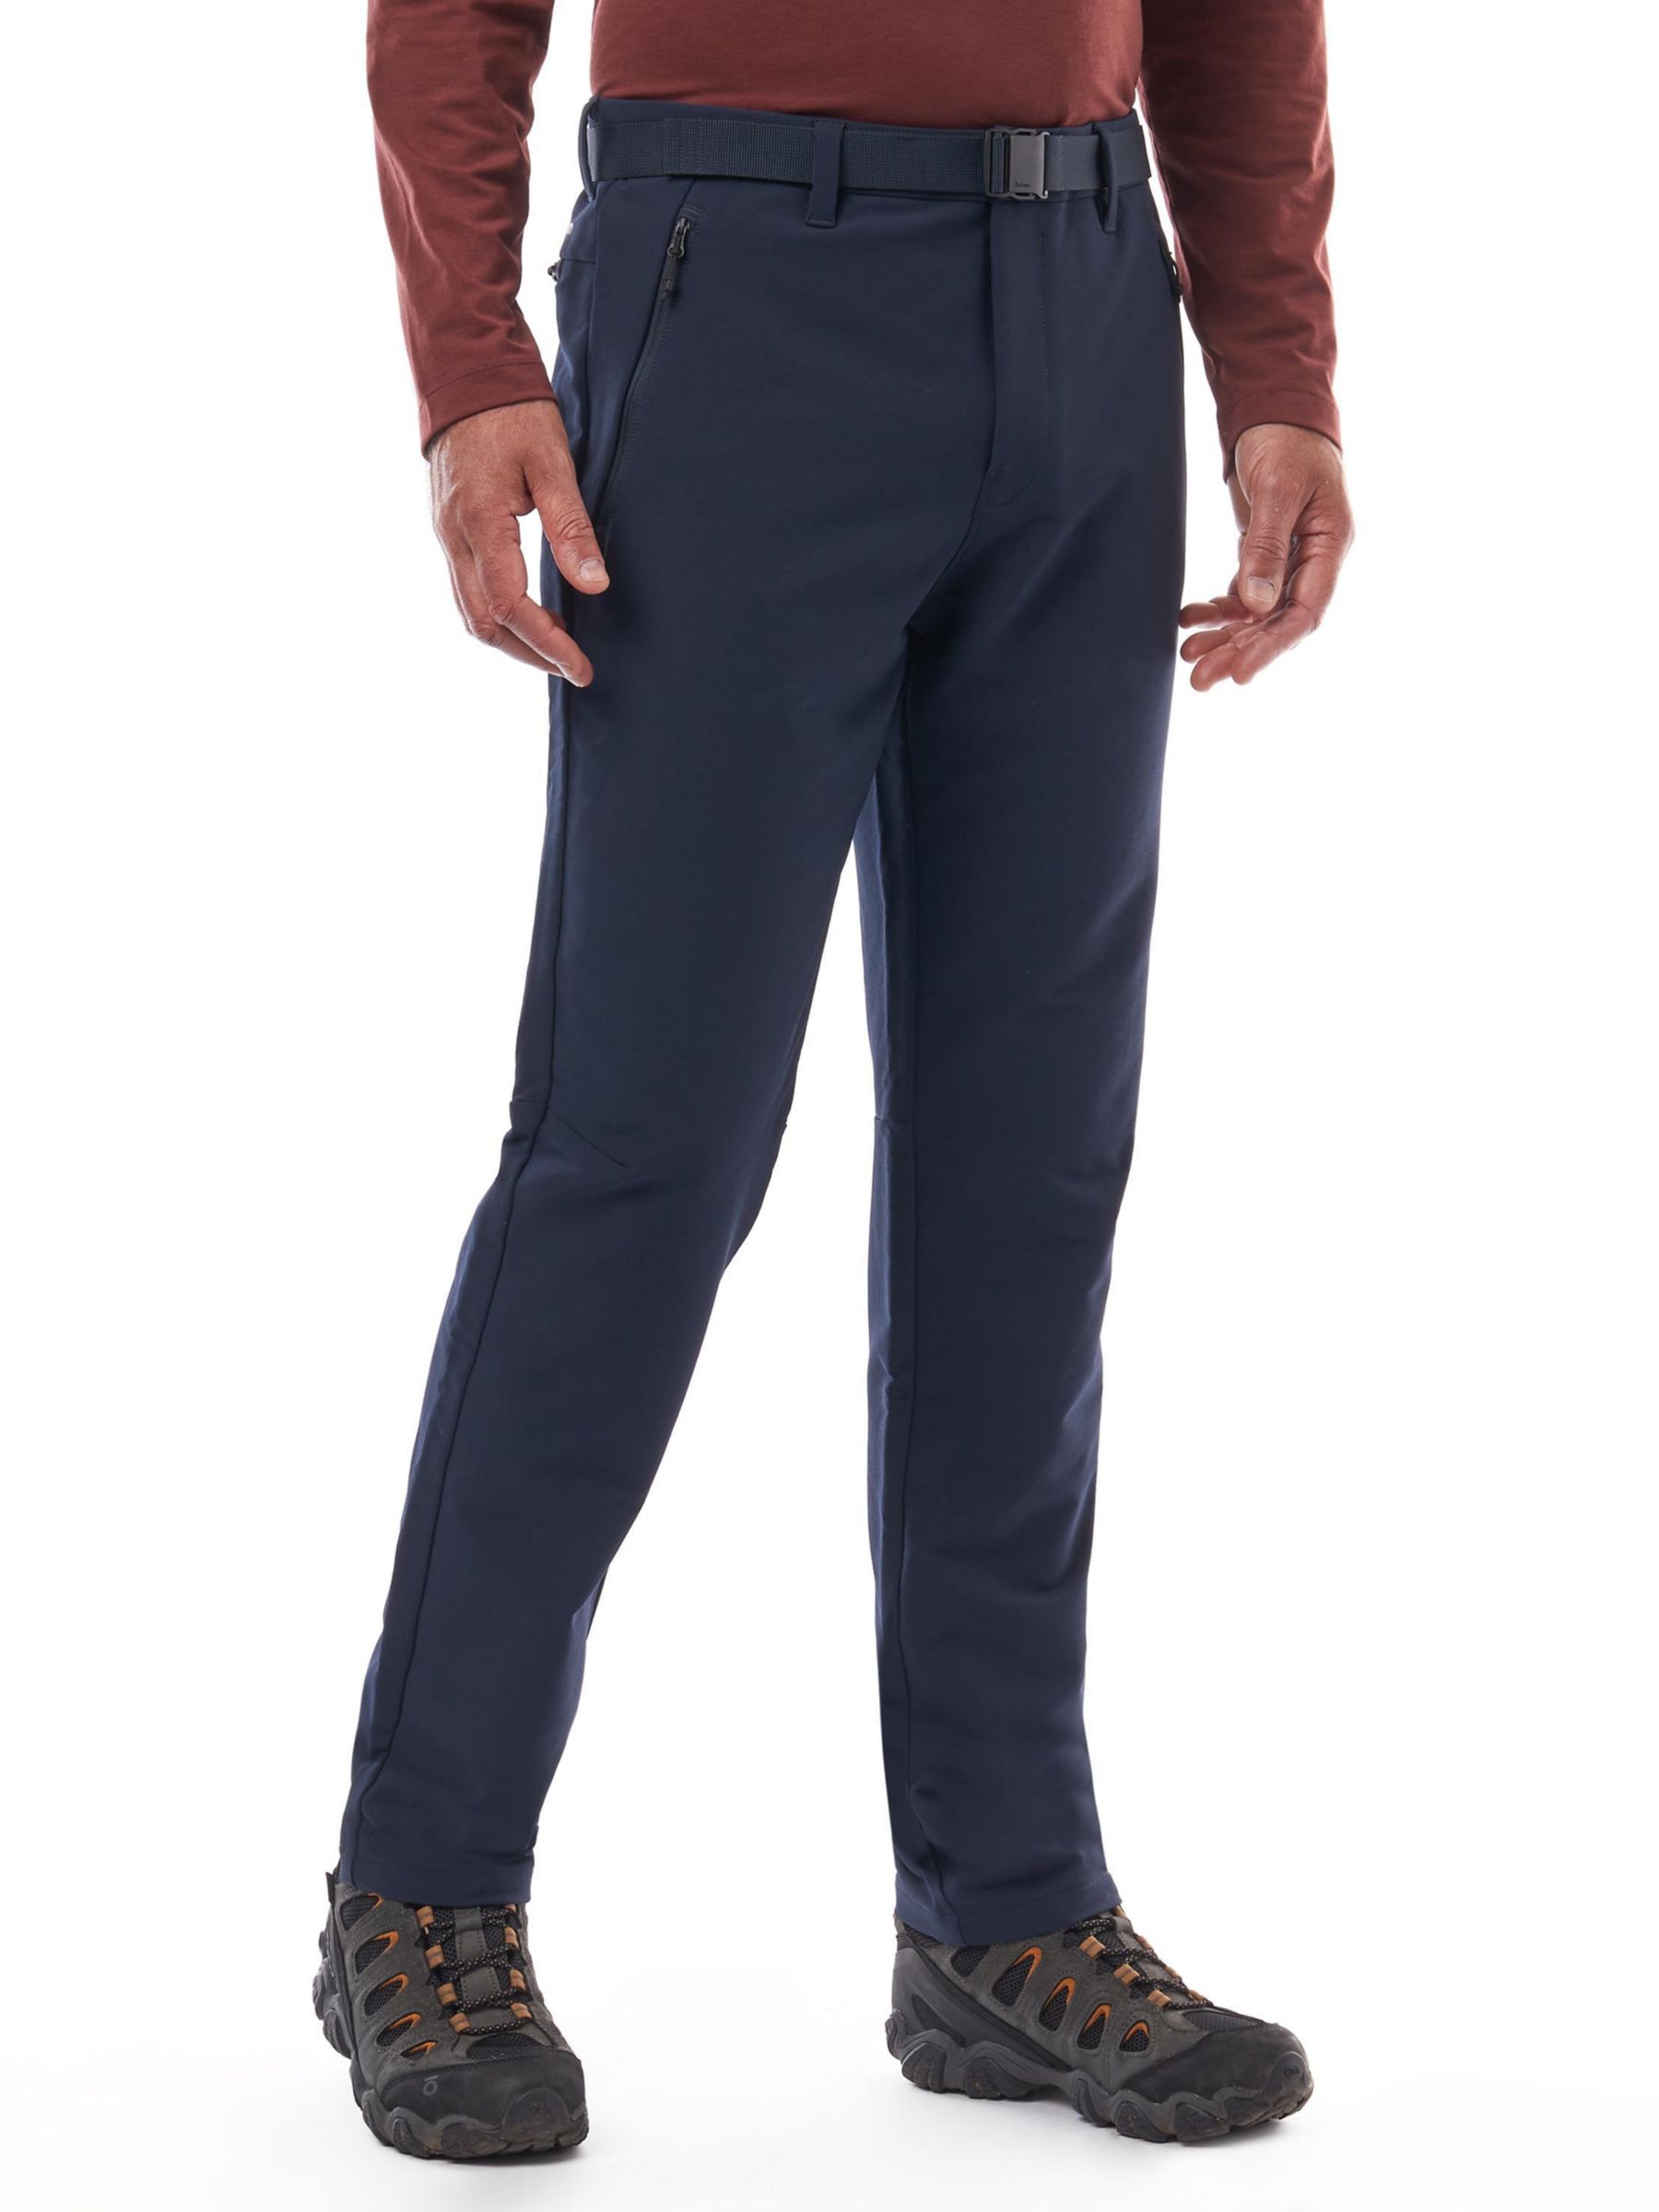 Rohan Striders Hiking Trousers, True Navy, 36R